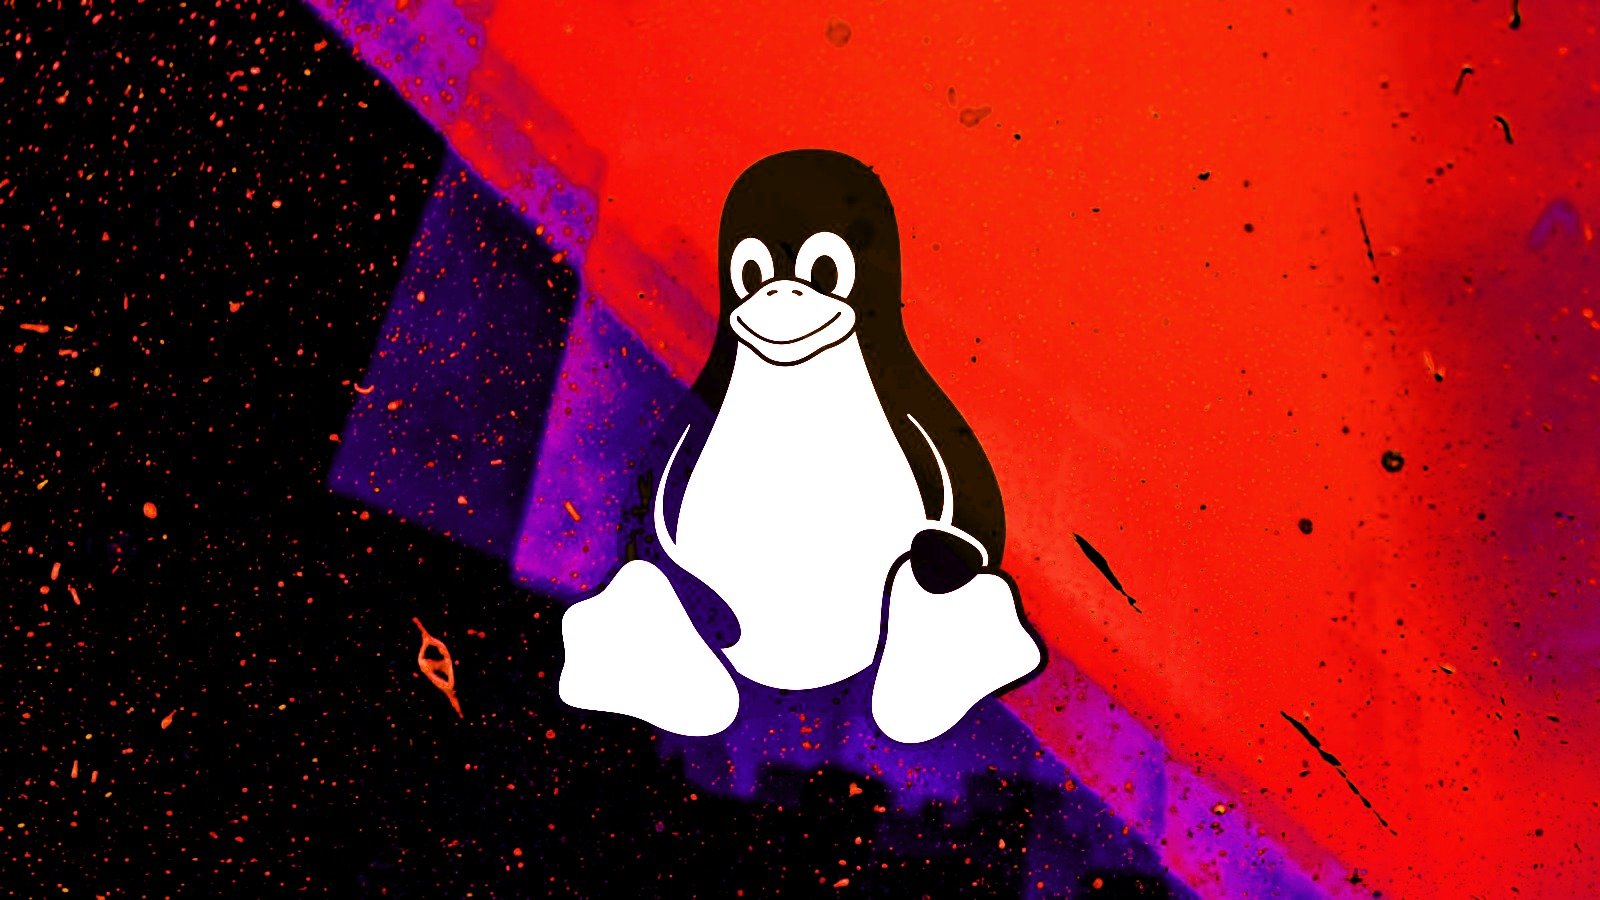 New Linux glibc vulnerability gives attackers access to major distributions